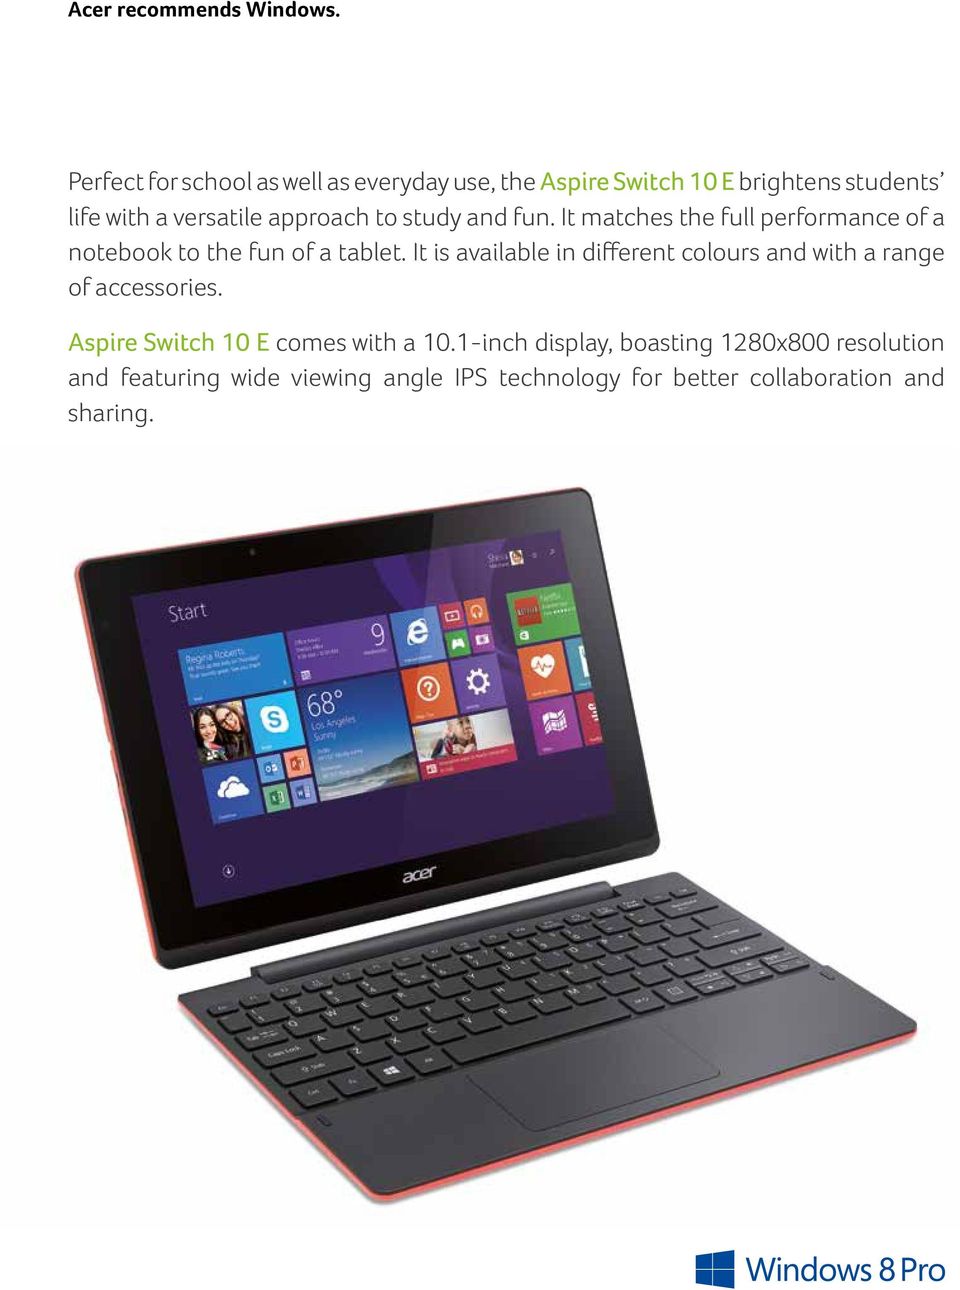 to study and fun. It matches the full performance of a notebook to the fun of a tablet.